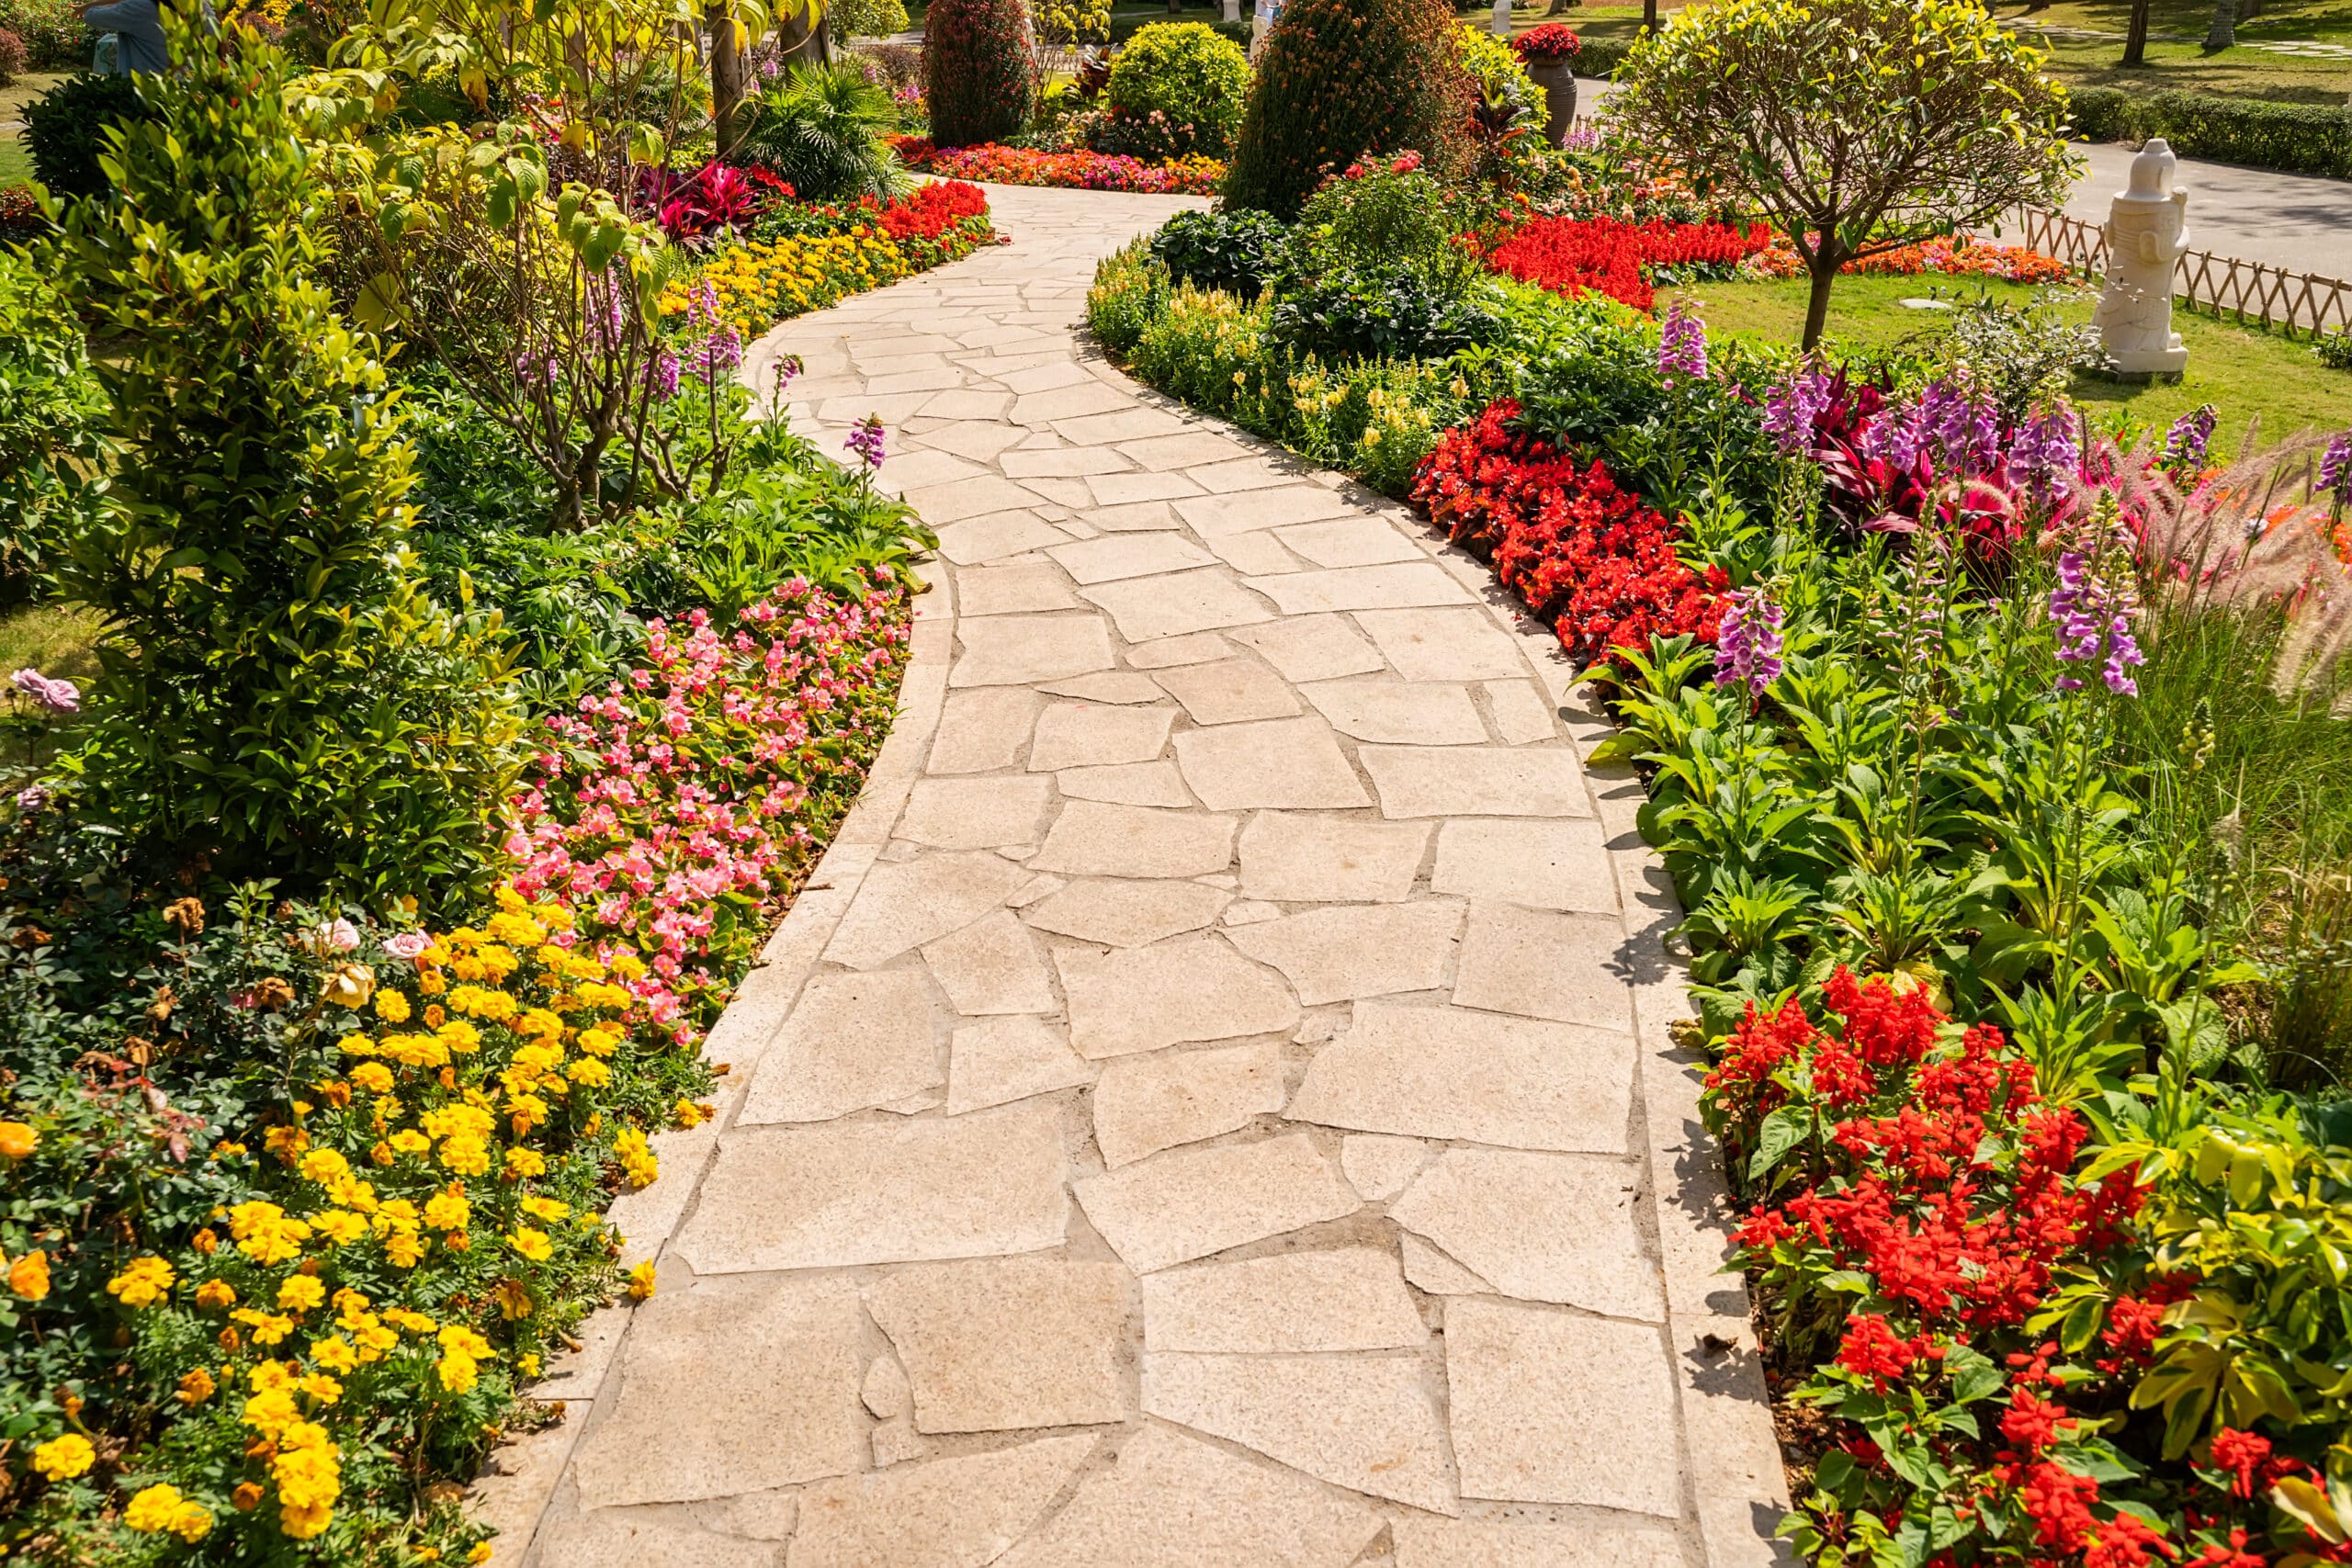 paver stone walkways are the perfect durable solution